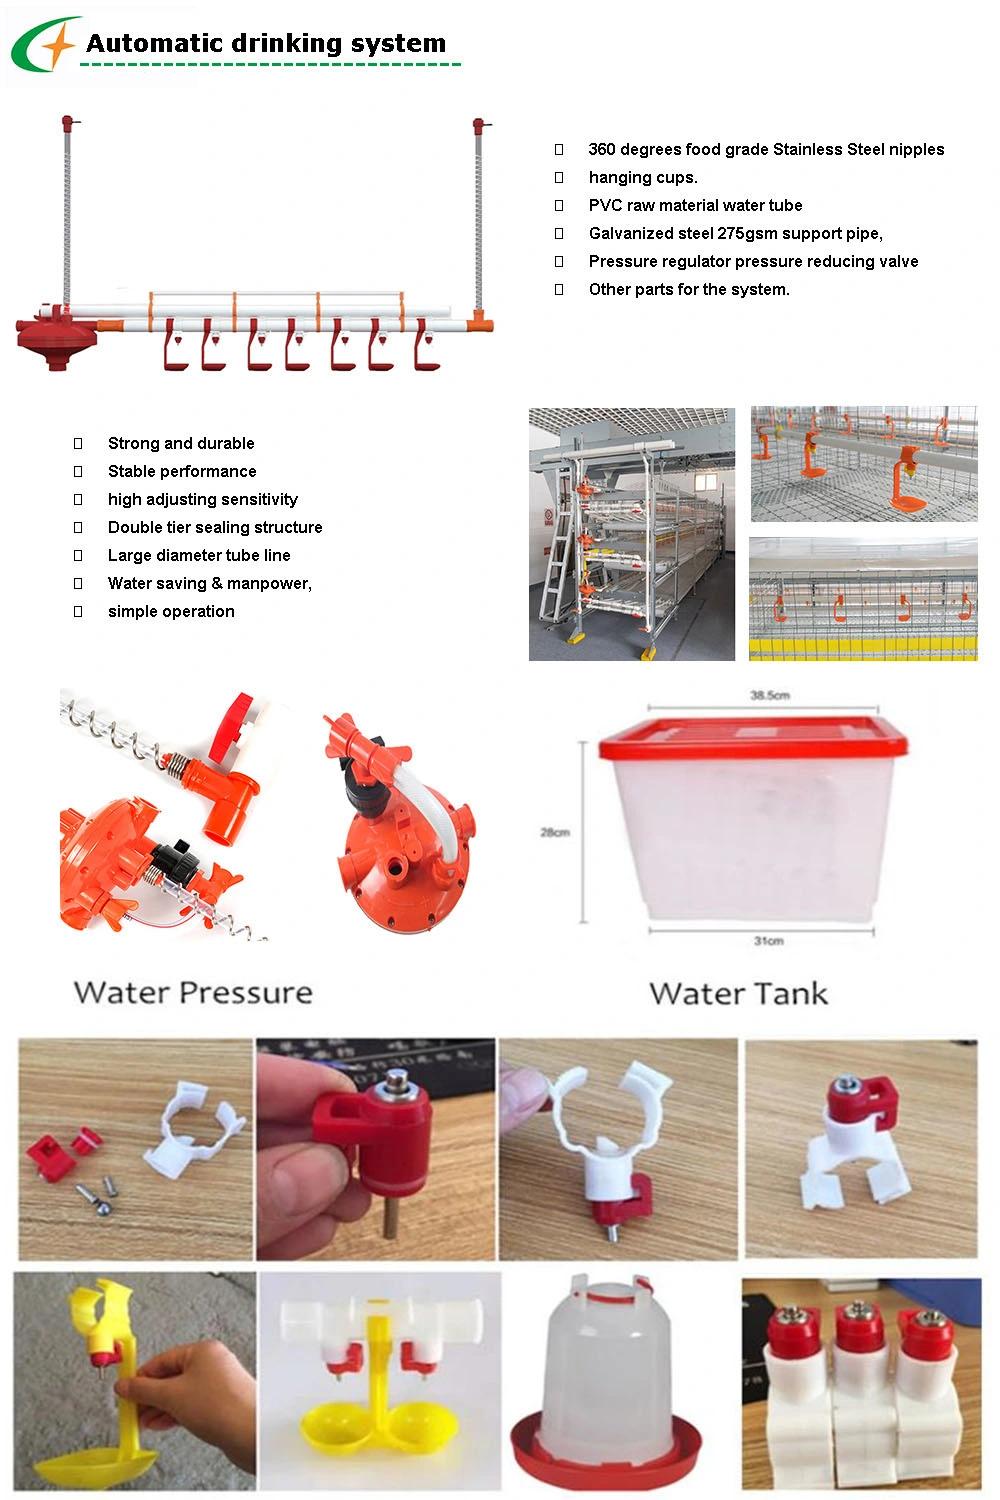 Automatic Broiler Feeding System H Type Battery Broiler Chicken Cage for Sale